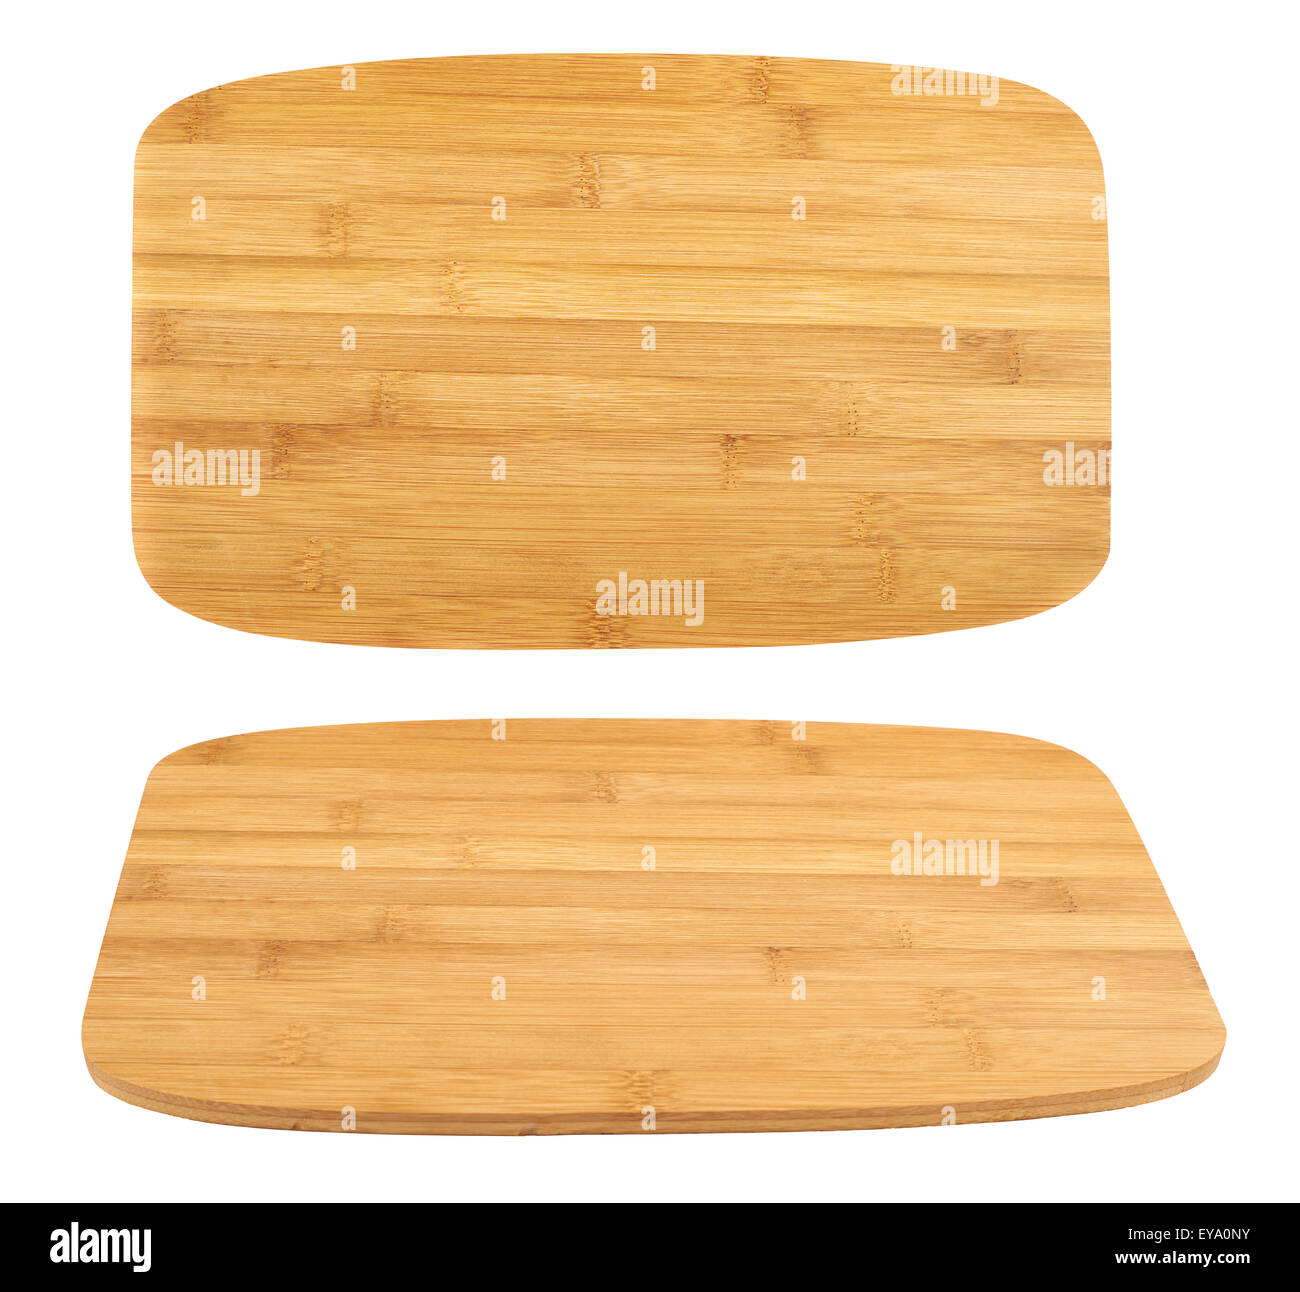 Cutting wooden board isolated Stock Photo